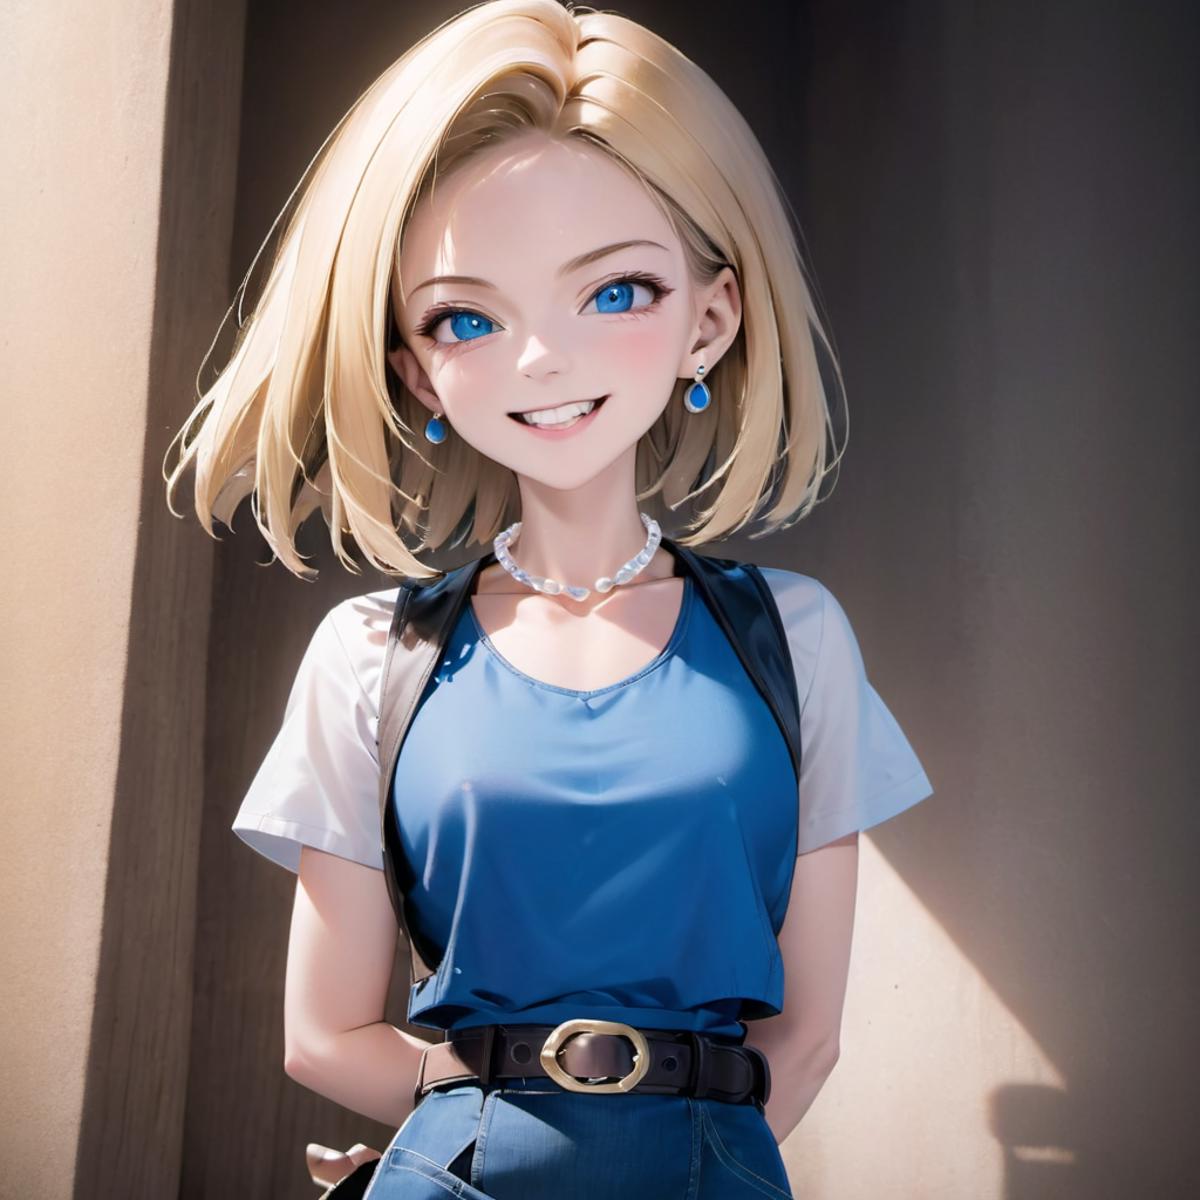 Android 18 image by xzxcet